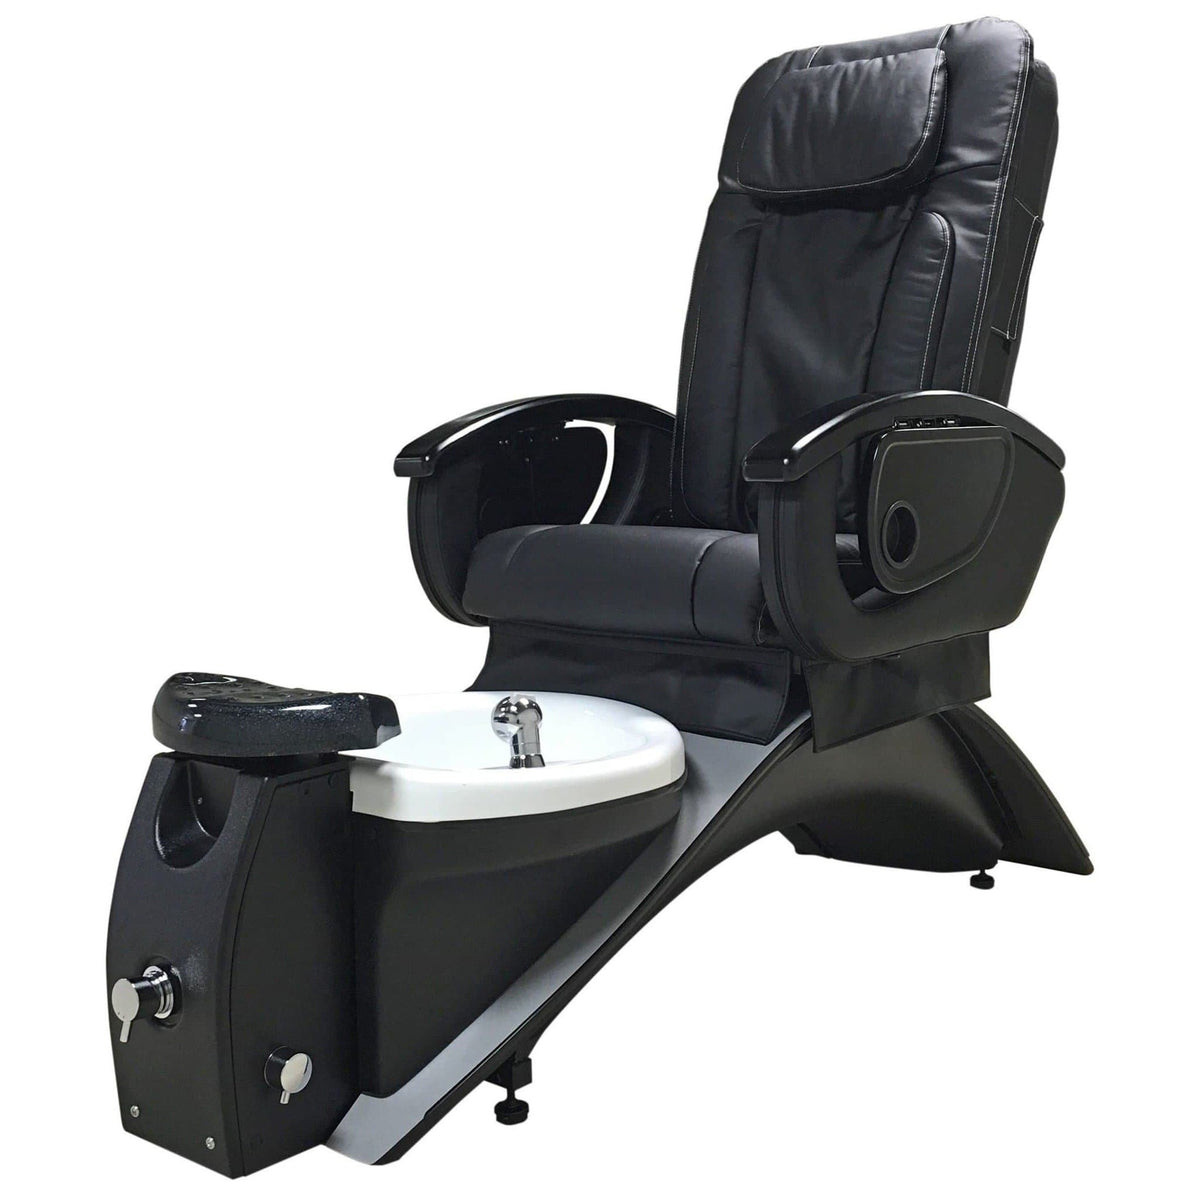 Continuum Continuum Vantage VE Pedicure Spa Chair Pedicure &amp; Spa Chairs - ChairsThatGive